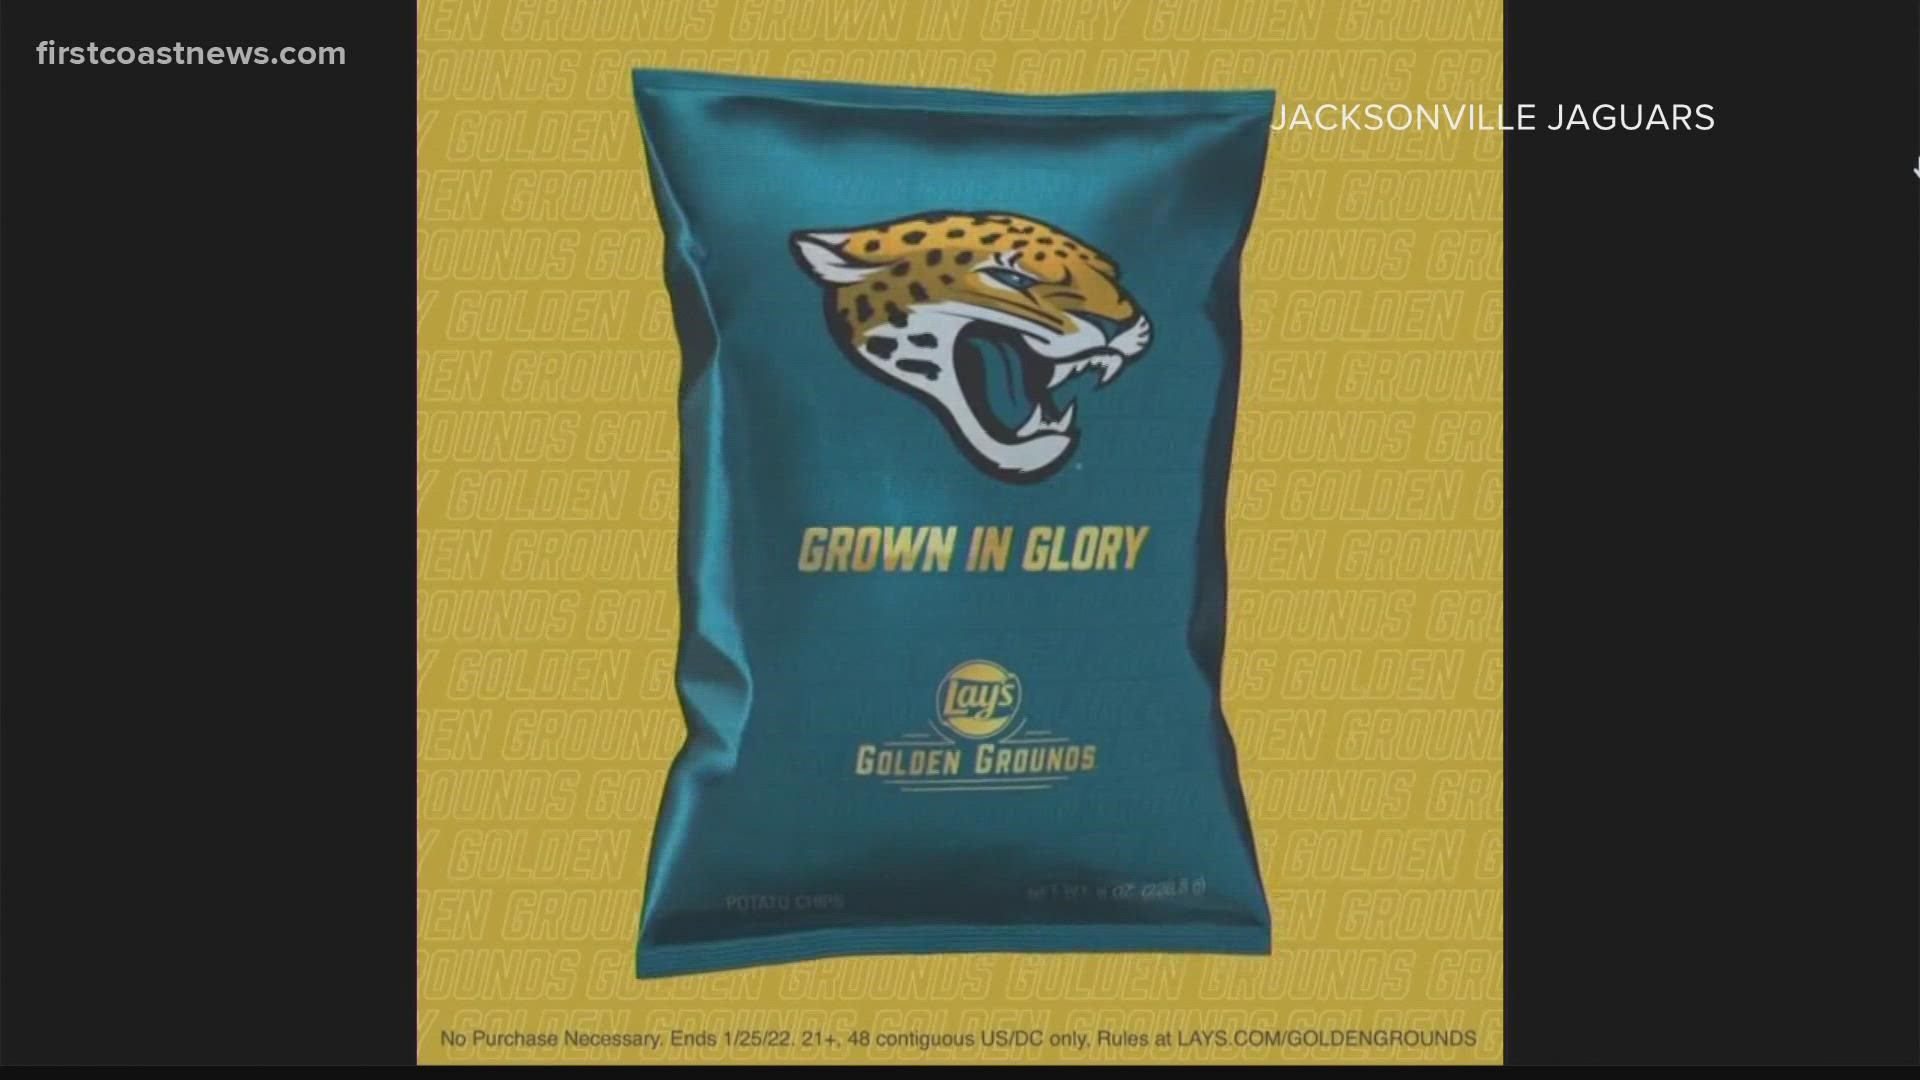 The new chips are called 'Grown in Glory.'